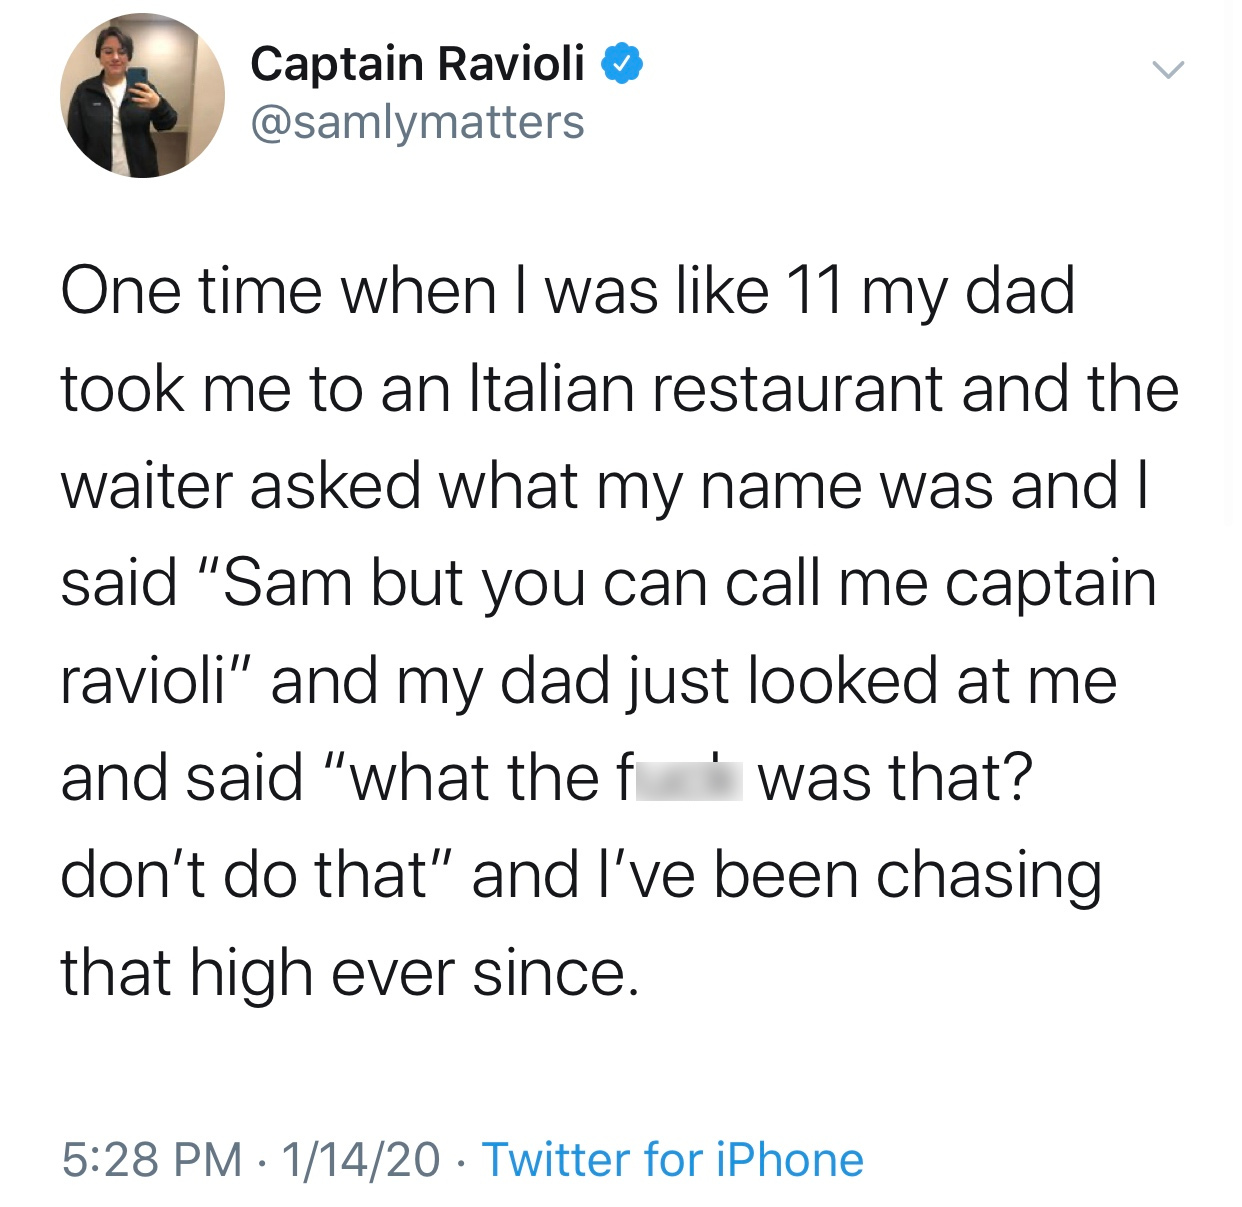 trump state of the union tweet - Captain Ravioli One time when I was 11 my dad took me to an Italian restaurant and the waiter asked what my name was and I said "Sam but you can call me captain ravioli" and my dad just looked at me and said "what the f'wa